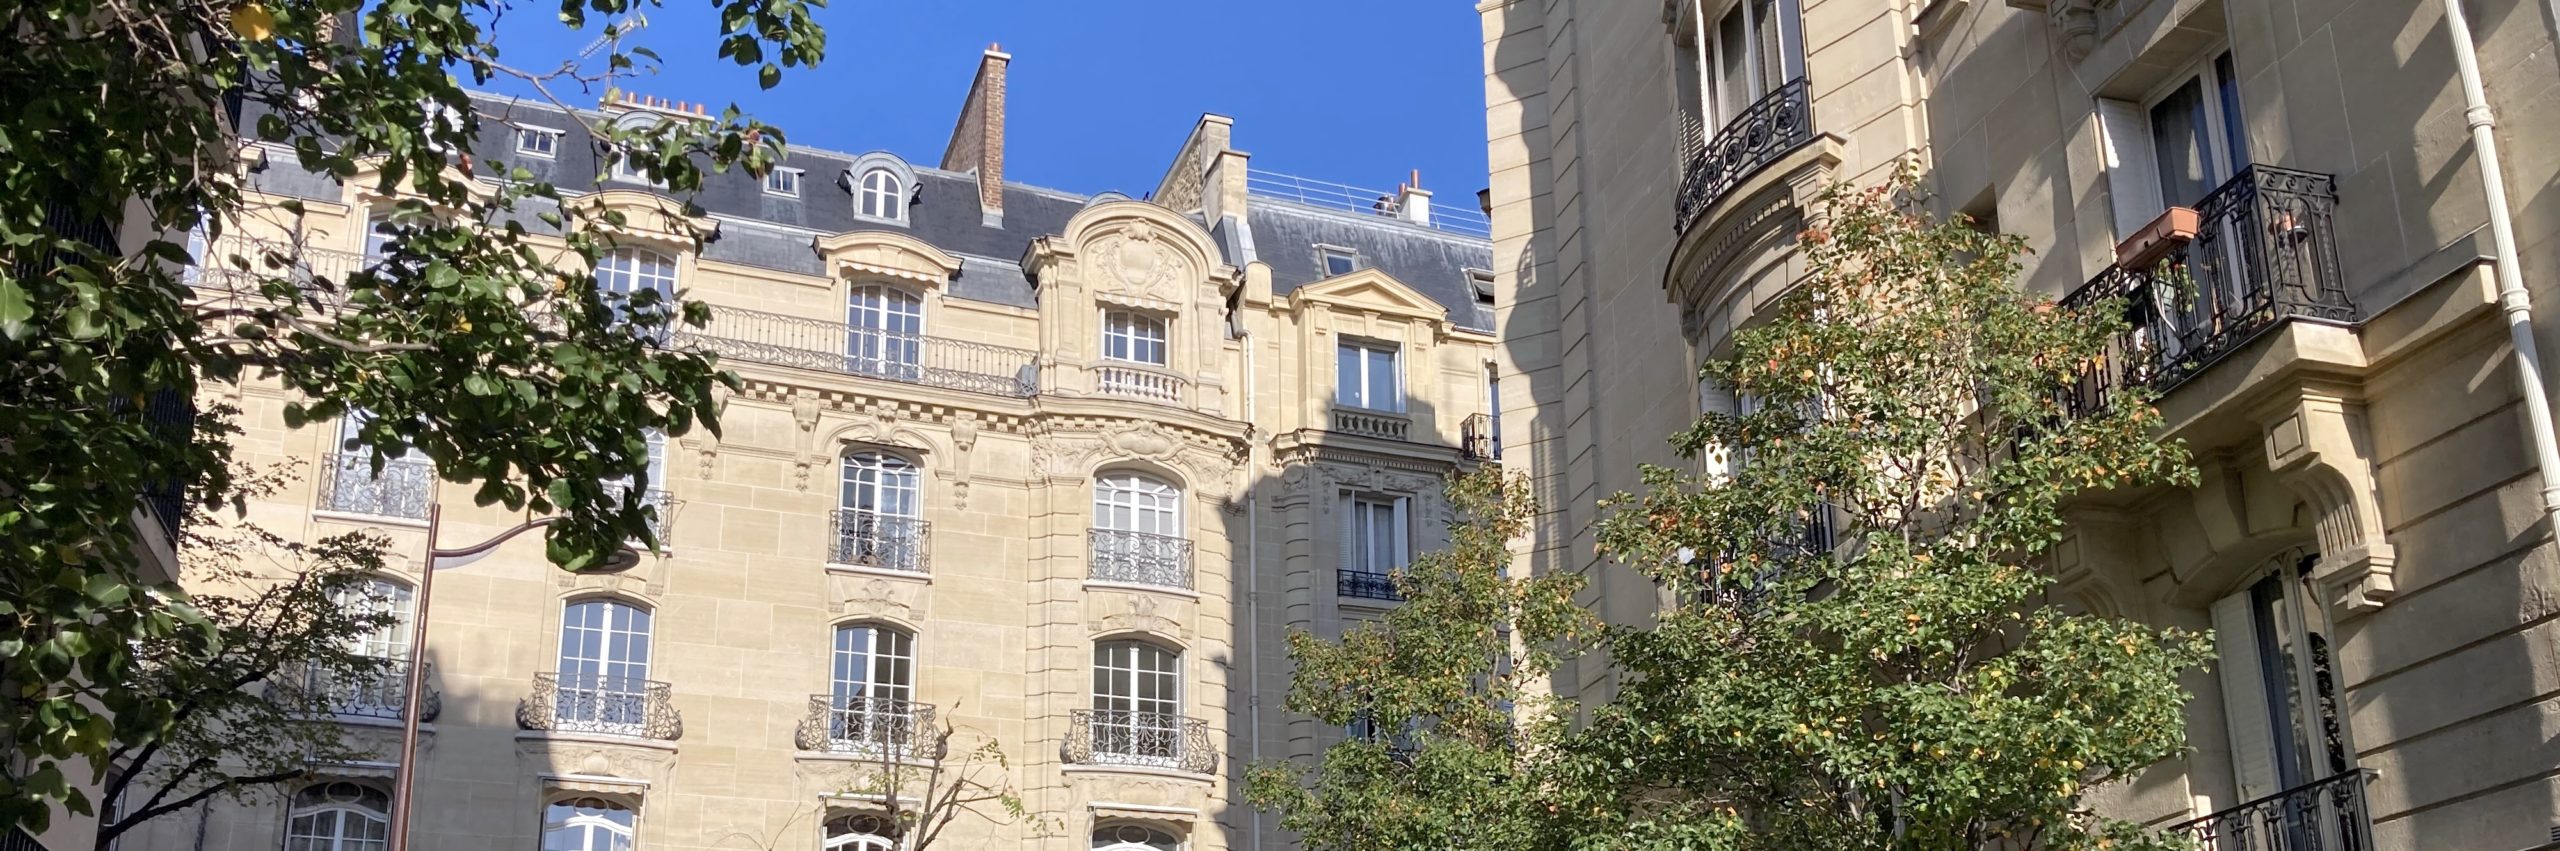 Chasseur immobilier Neuilly sur Seine